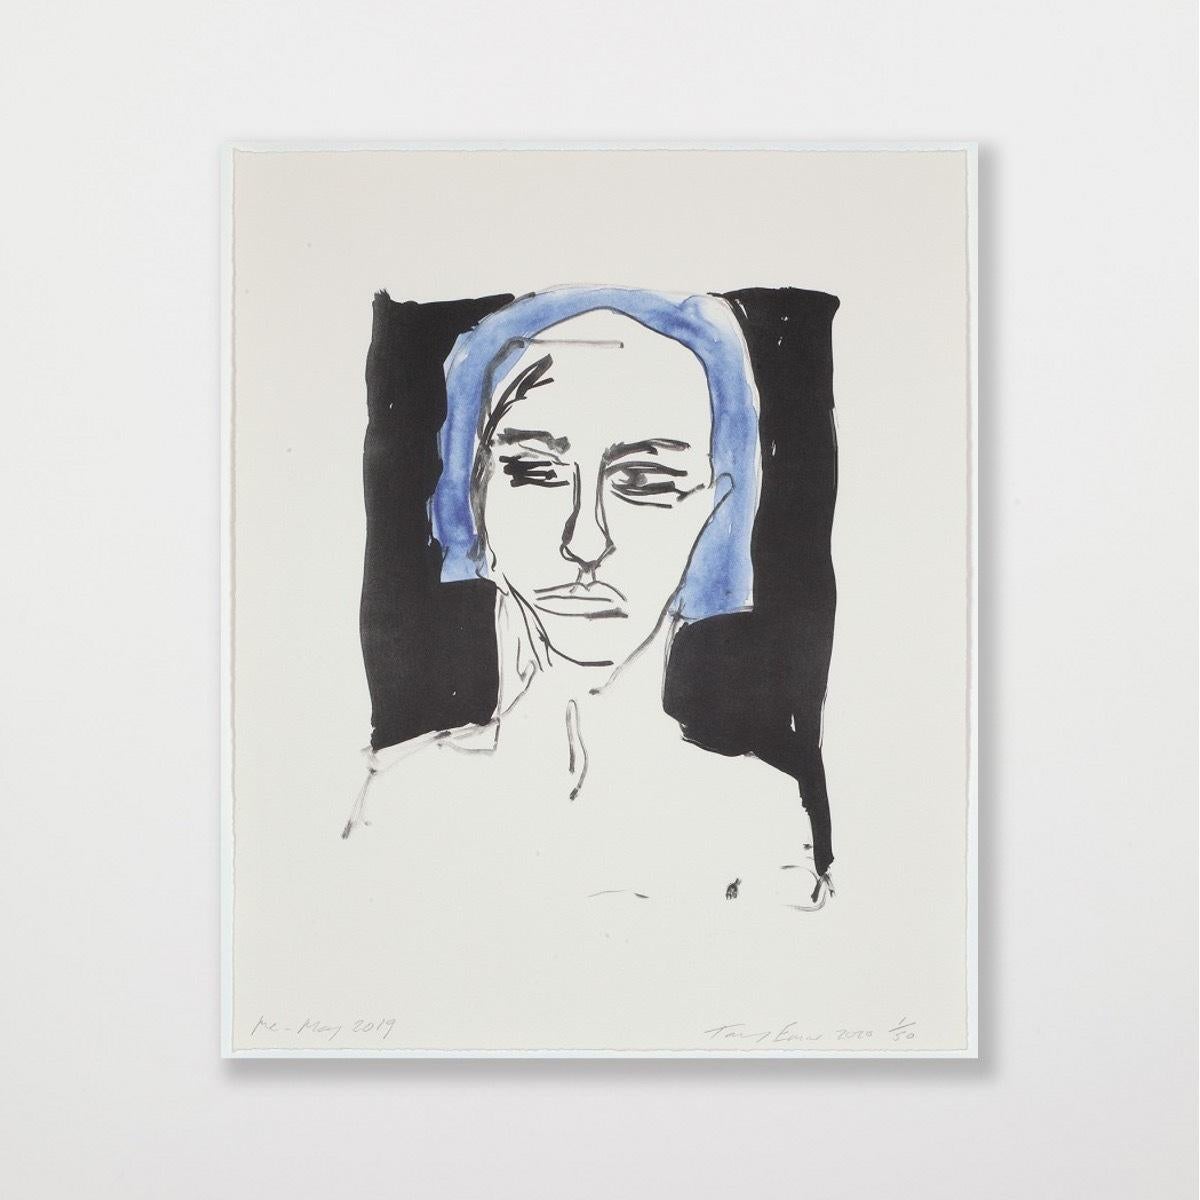 These Feelings Were True -Emin, Contemporary, YBAs, Lithograph, Blue, Portrait For Sale 6